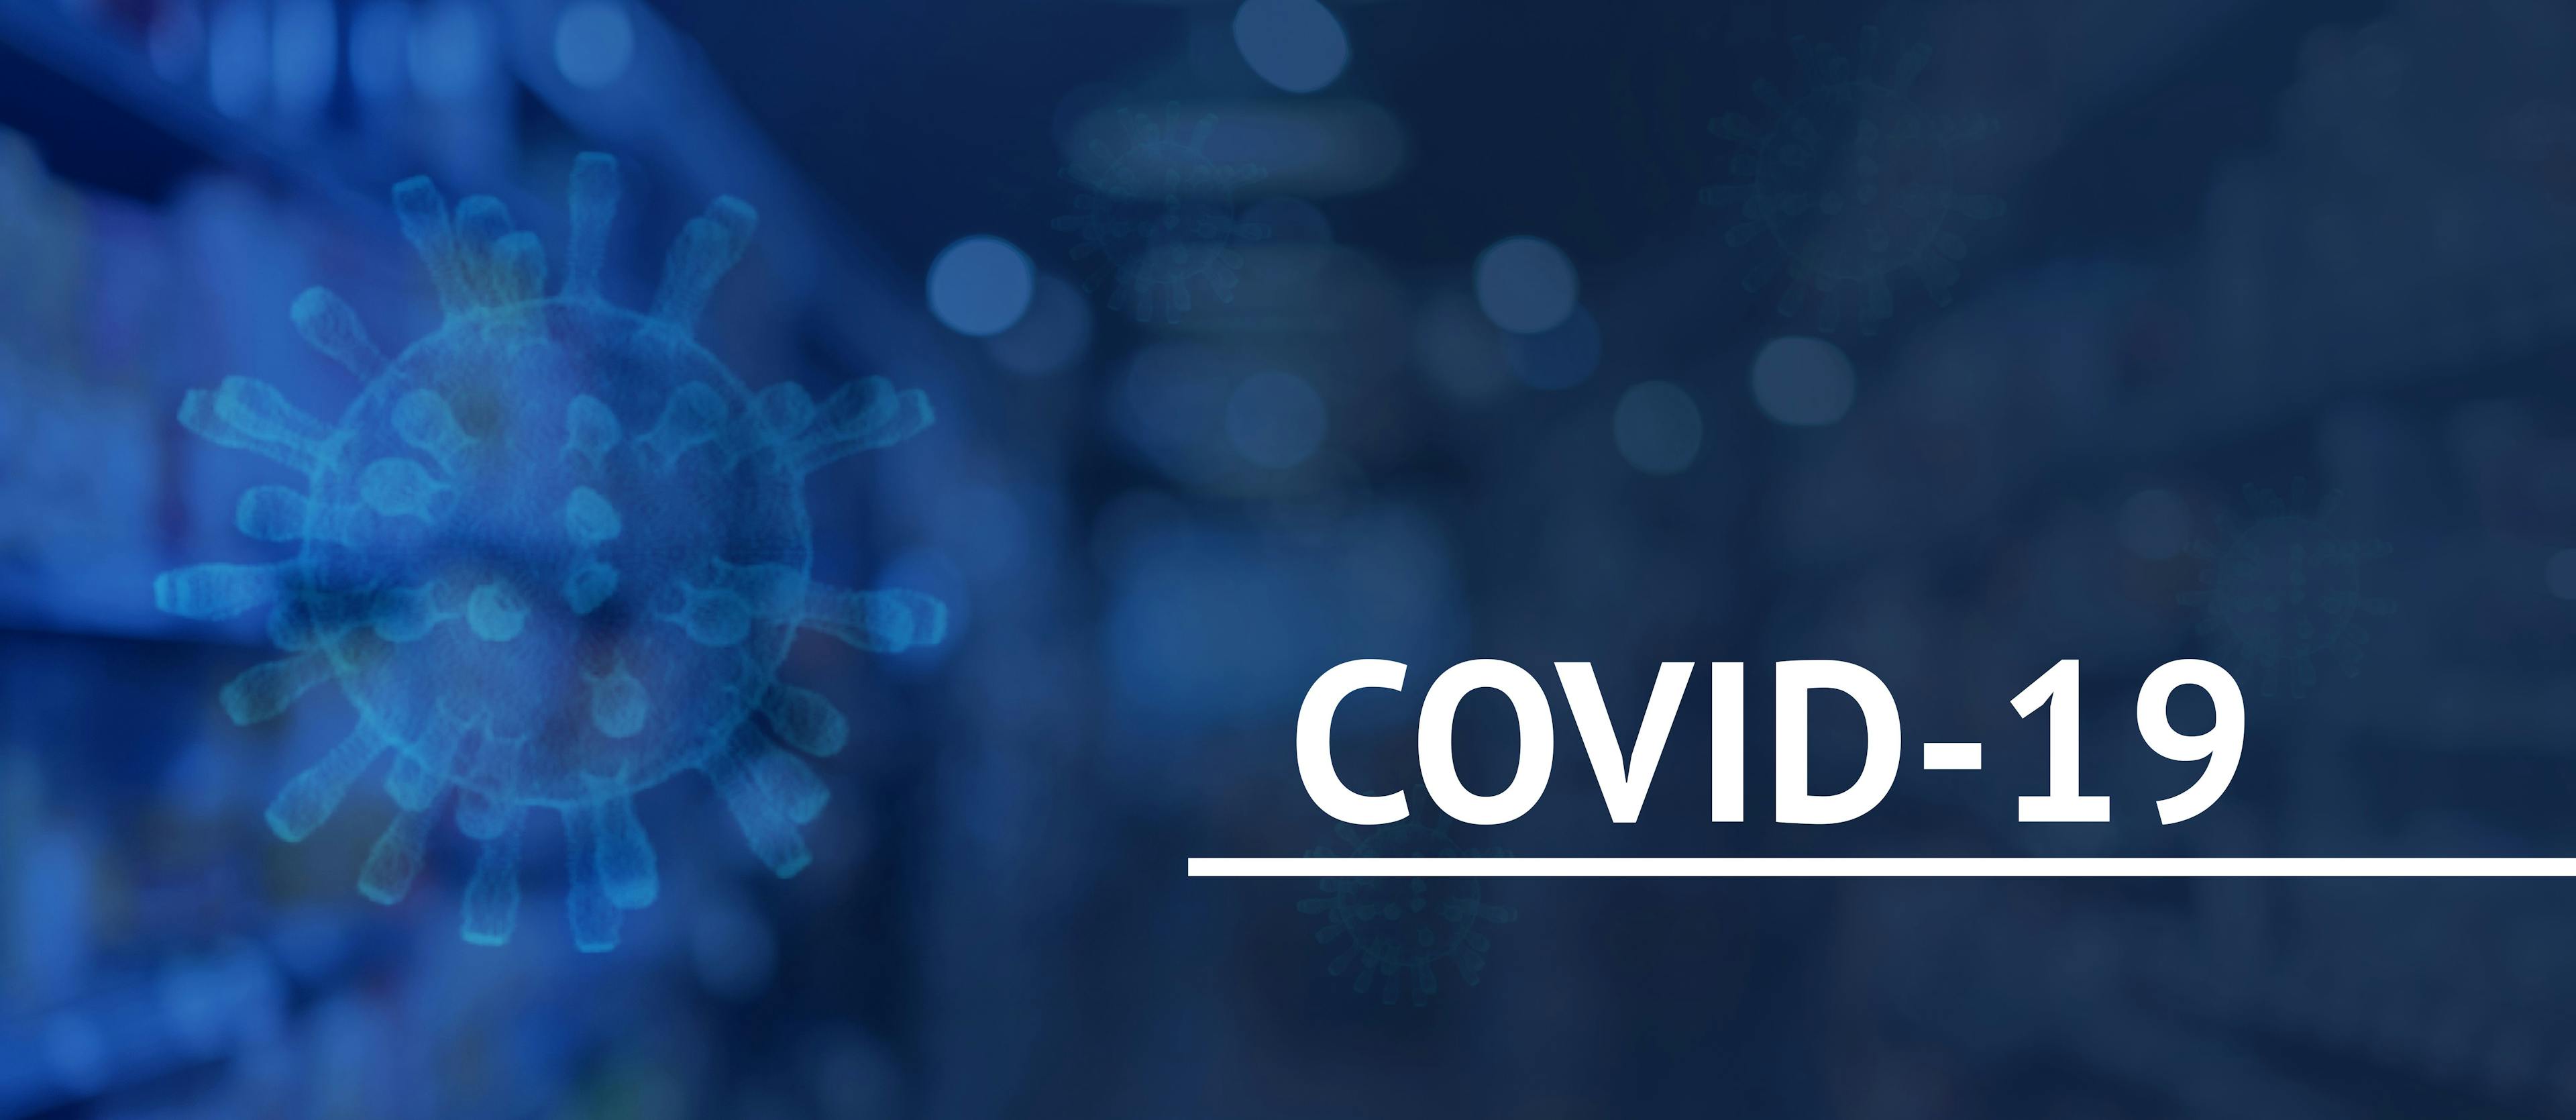 Best Read Articles on COVID-19 Drug-Related News in 2021